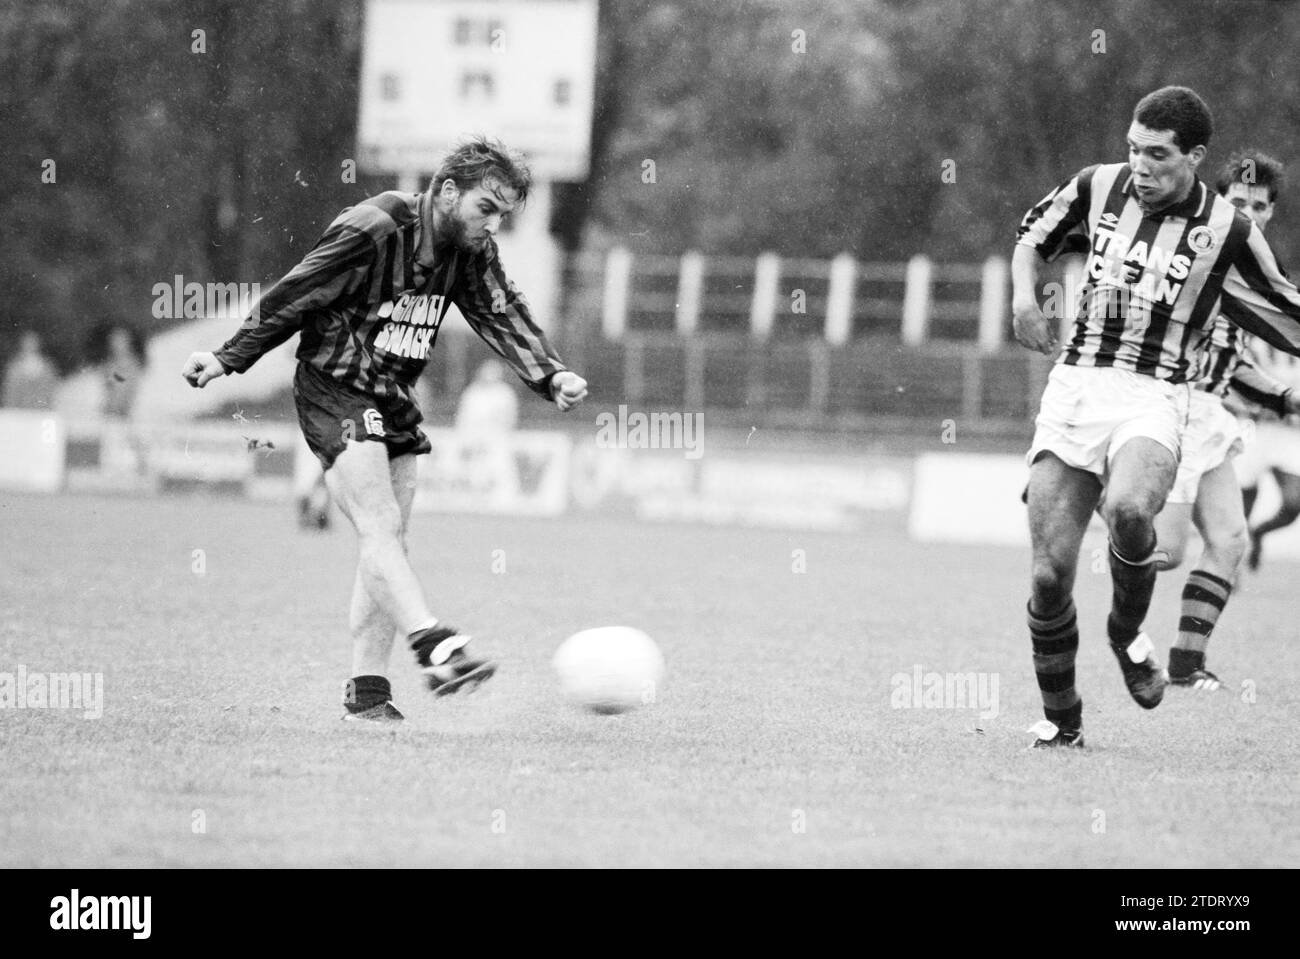 Football, EDO - RCH, 25-09-1993, Whizgle News from the Past, Tailored for the Future. Explore historical narratives, Dutch The Netherlands agency image with a modern perspective, bridging the gap between yesterday's events and tomorrow's insights. A timeless journey shaping the stories that shape our future Stock Photo